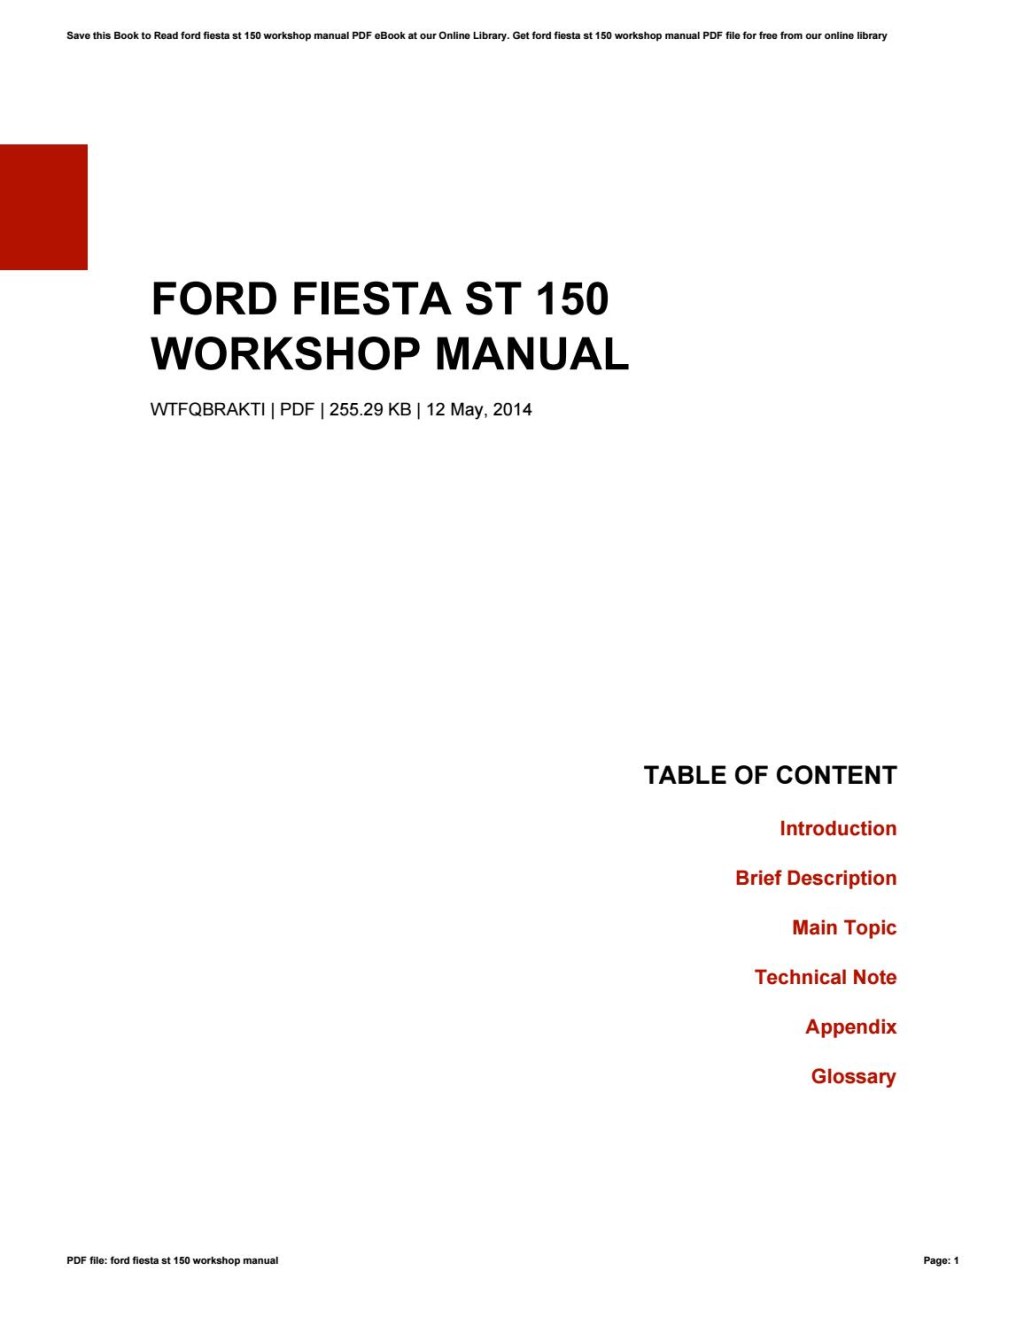 Picture of: Ford fiesta st  workshop manual by Michael – Issuu